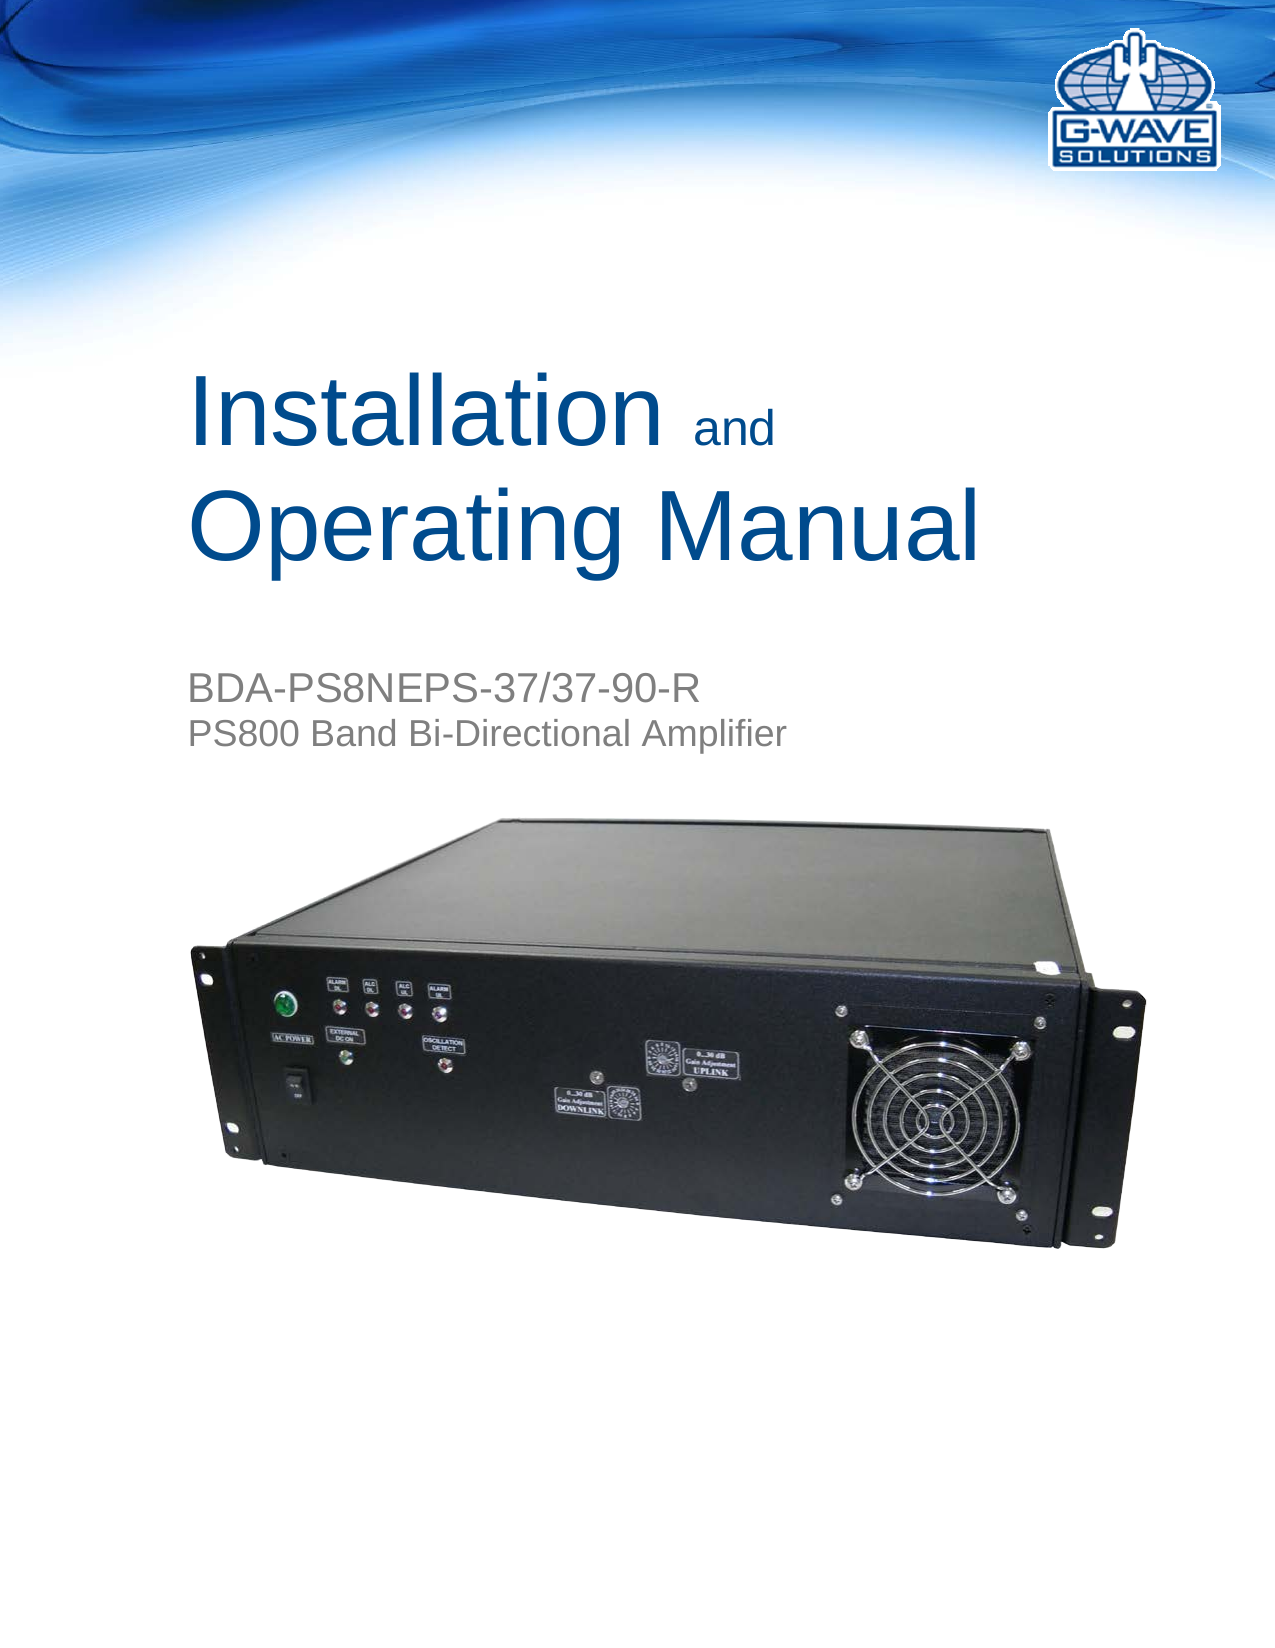       Installation and Operating Manual    BDA-PS8NEPS-37/37-90-R PS800 Band Bi-Directional Amplifier     